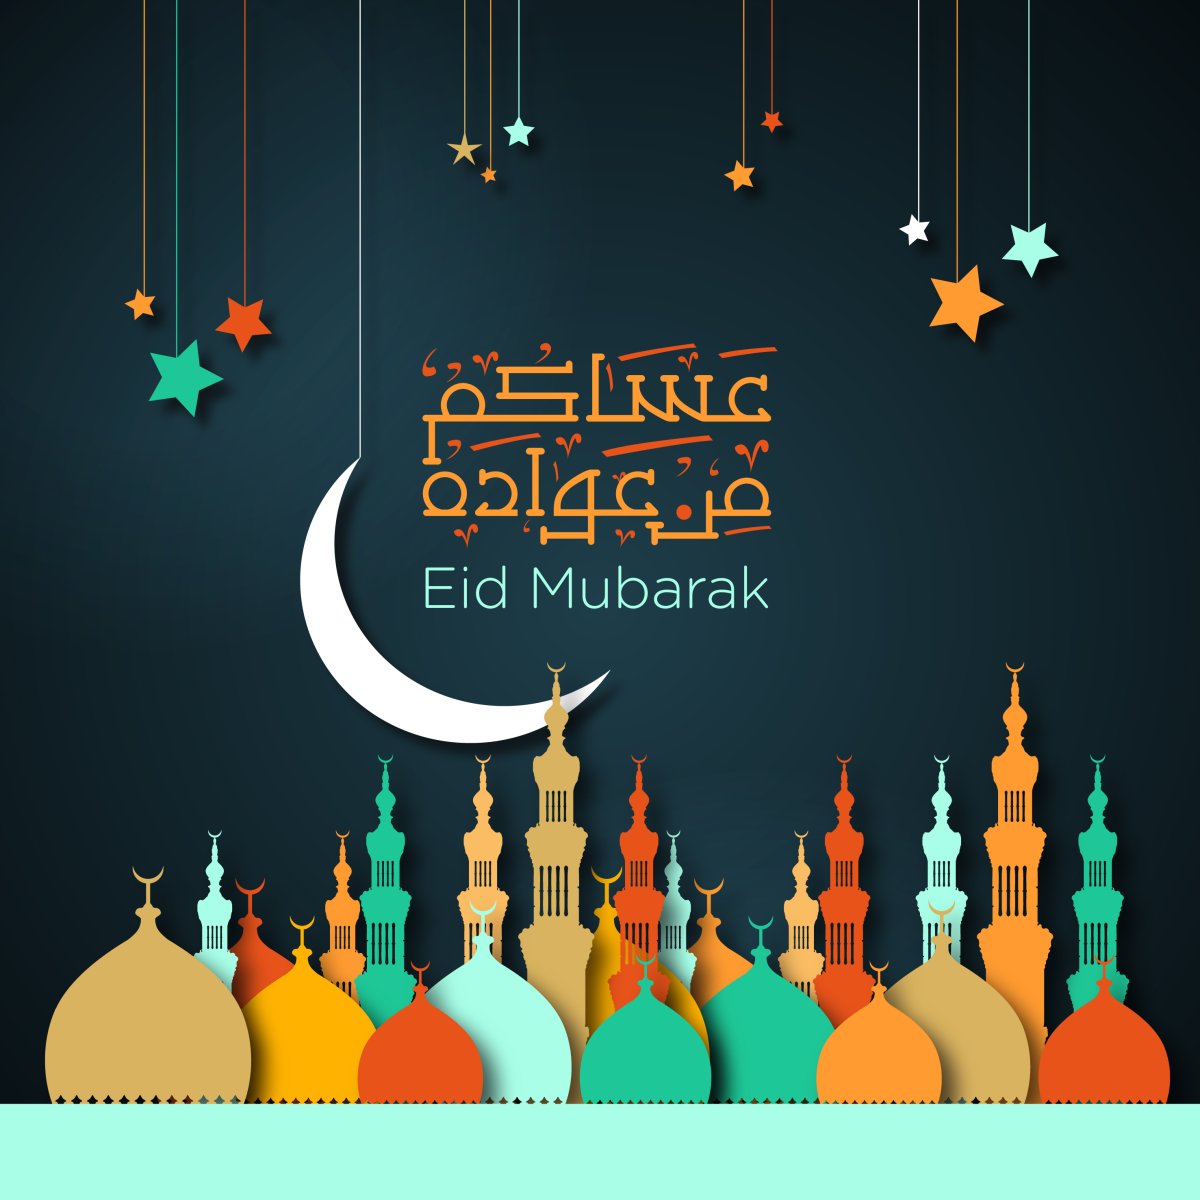 Eid al-Adha begins in the evening of August 31, 2017 and ends  in the evening of September 4, 2017.